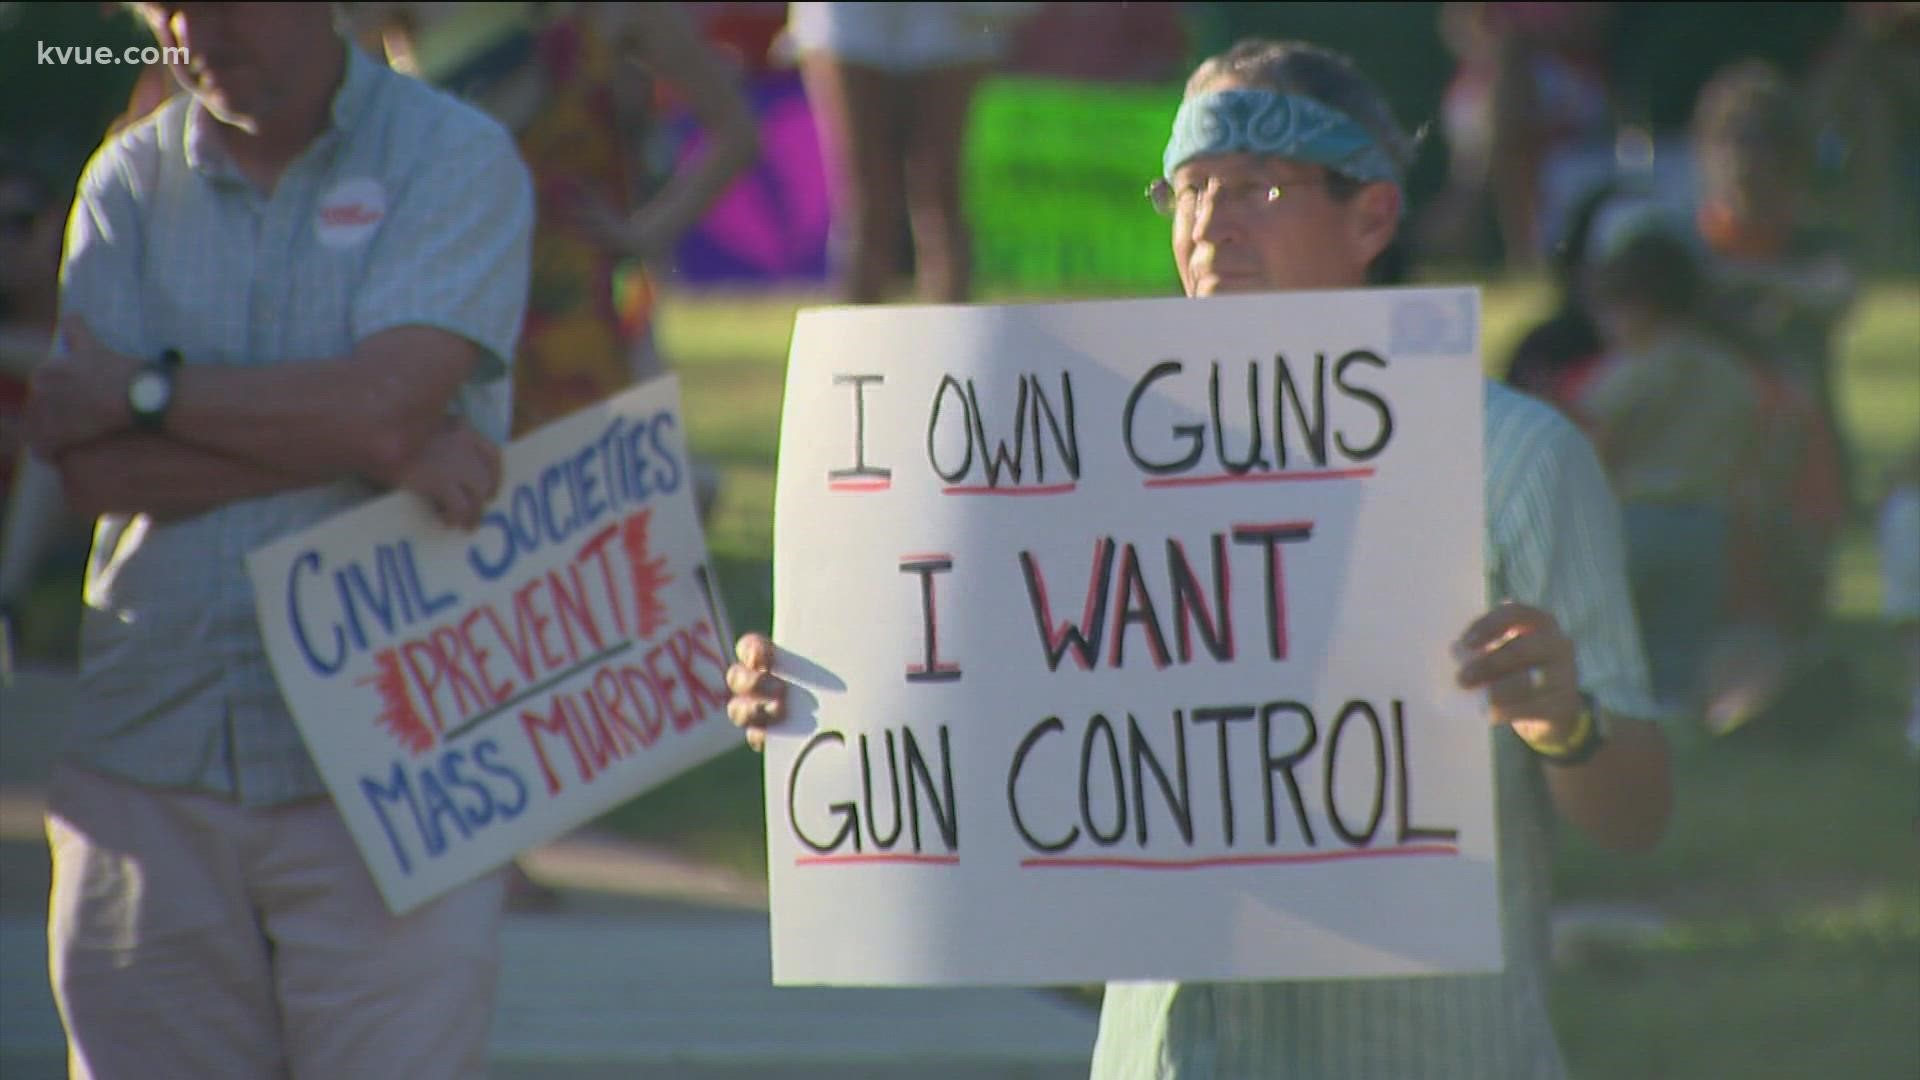 Event attendees heard from teachers and victims of gun violence, all while calling for change.